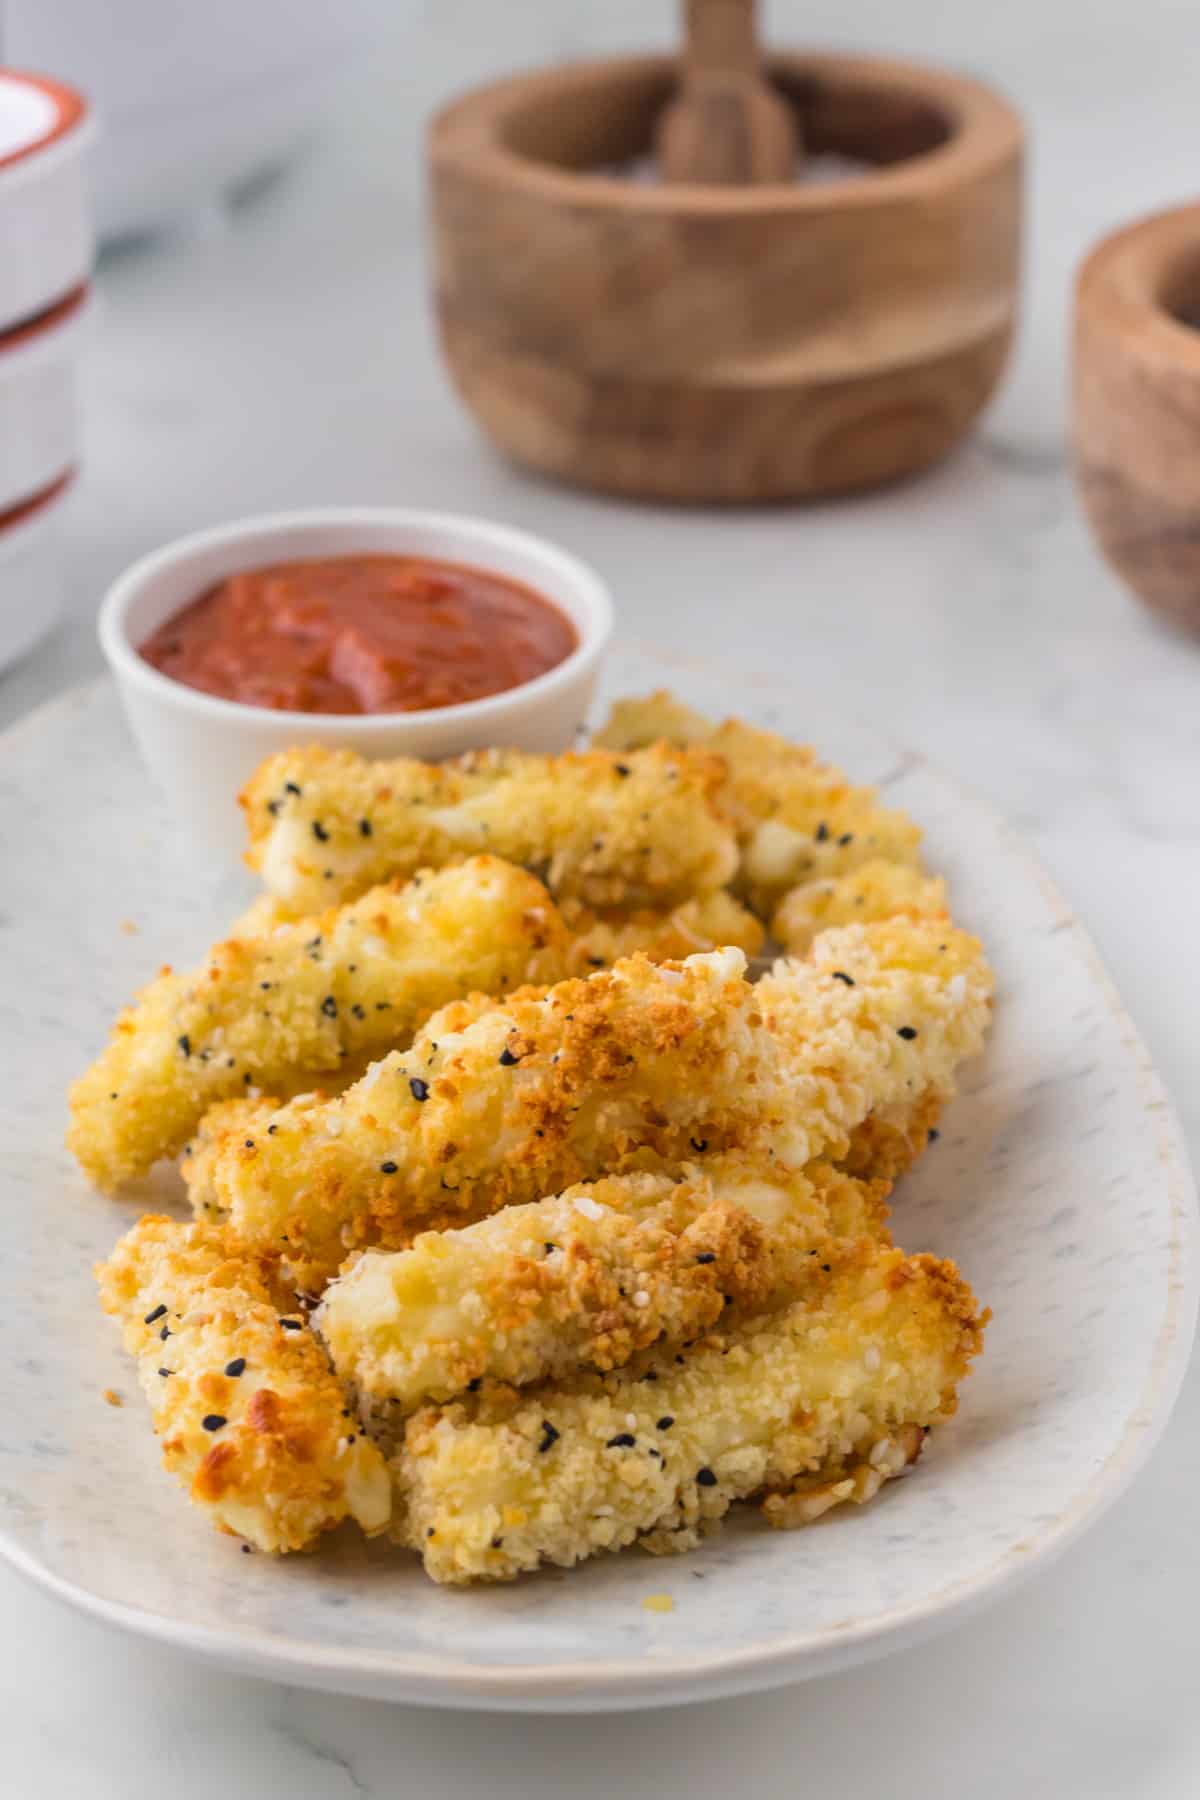 These easy Air Fryer Mozzarella Sticks are breaded mozzarella string cheese that are perfectly crispy on the outside and cheesy on the inside. Just as tasty as the deep fried version, without the extra calories and mess.